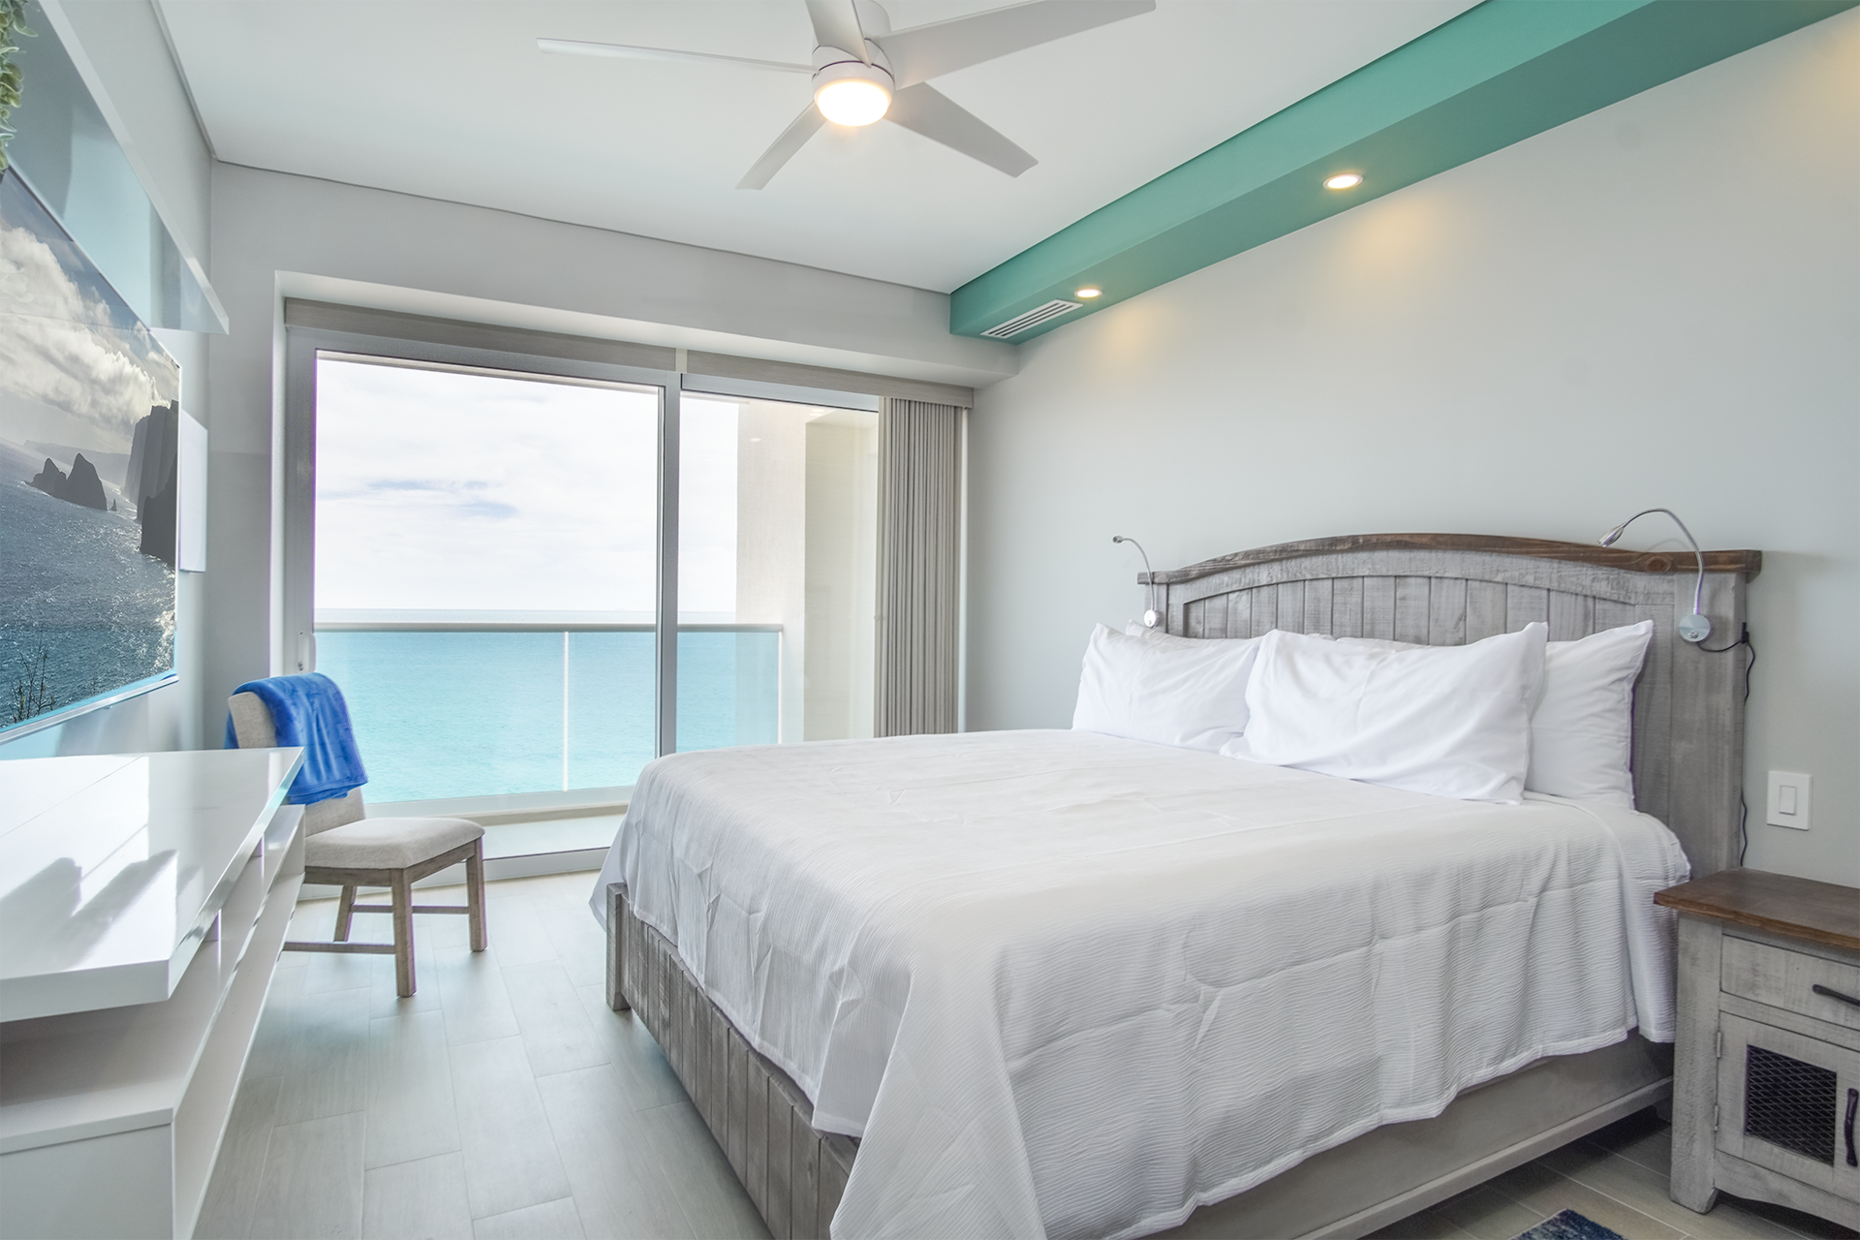 Tow of the three bedrooms open onto the ocean front patio